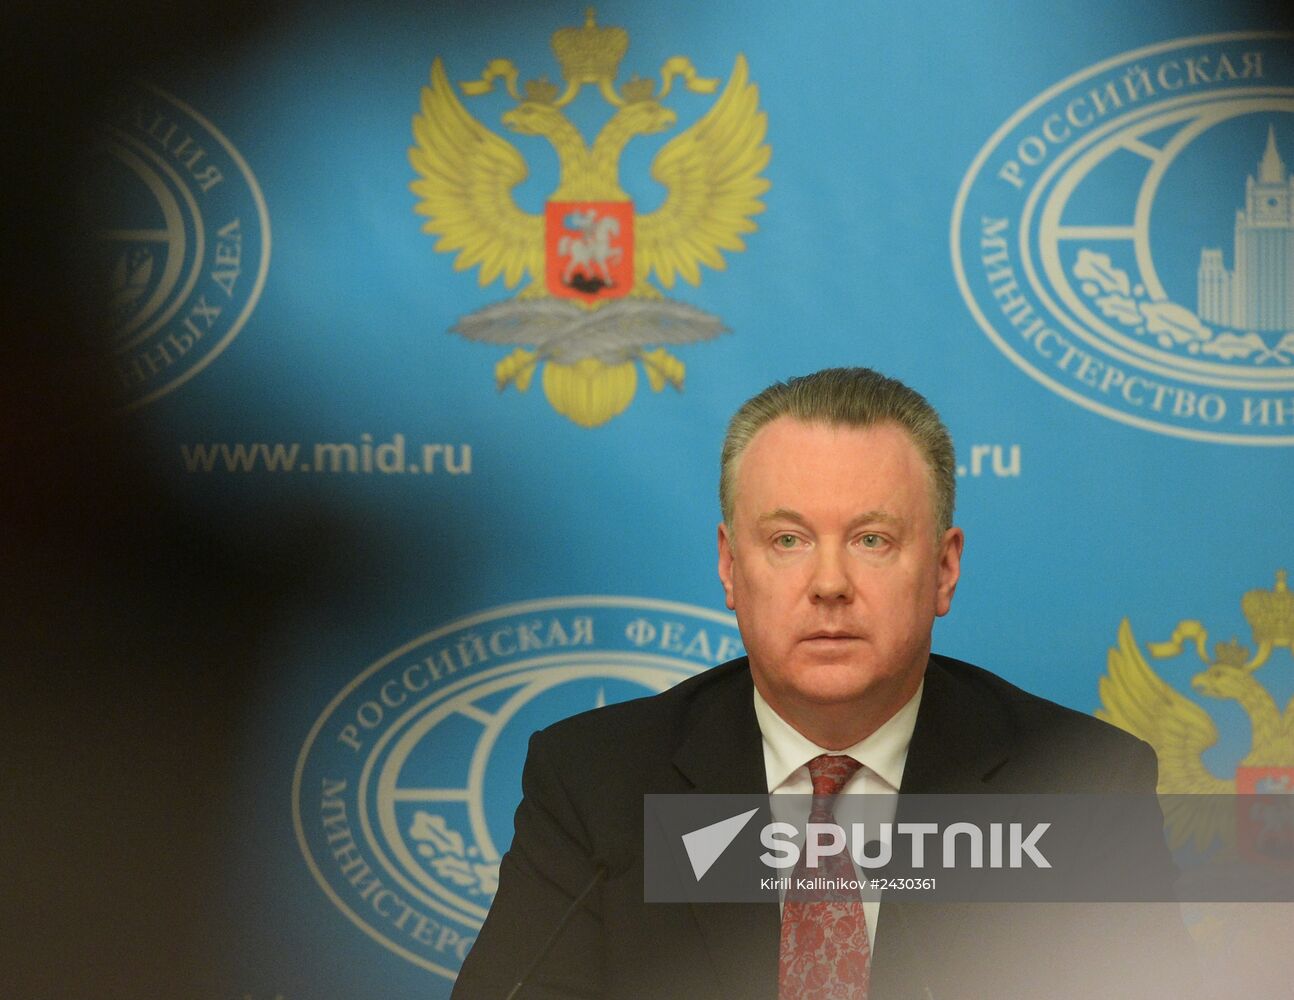 News briefing of Foreign Ministry spokesman Alexander Lukashevich